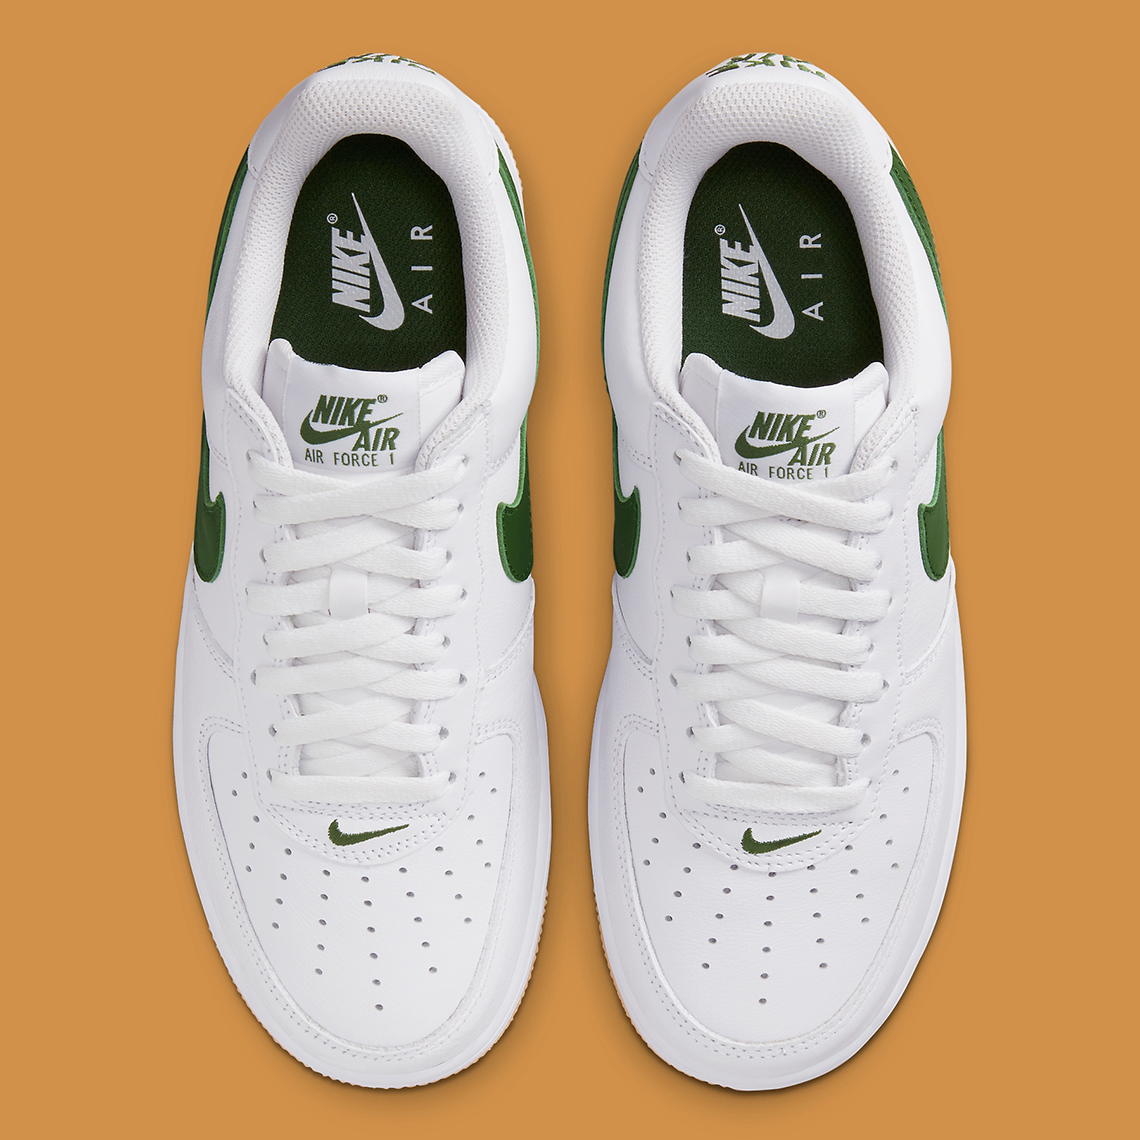 Nike-Air-Force-1-Color-of-the-month-FD7039-101-1.jpg